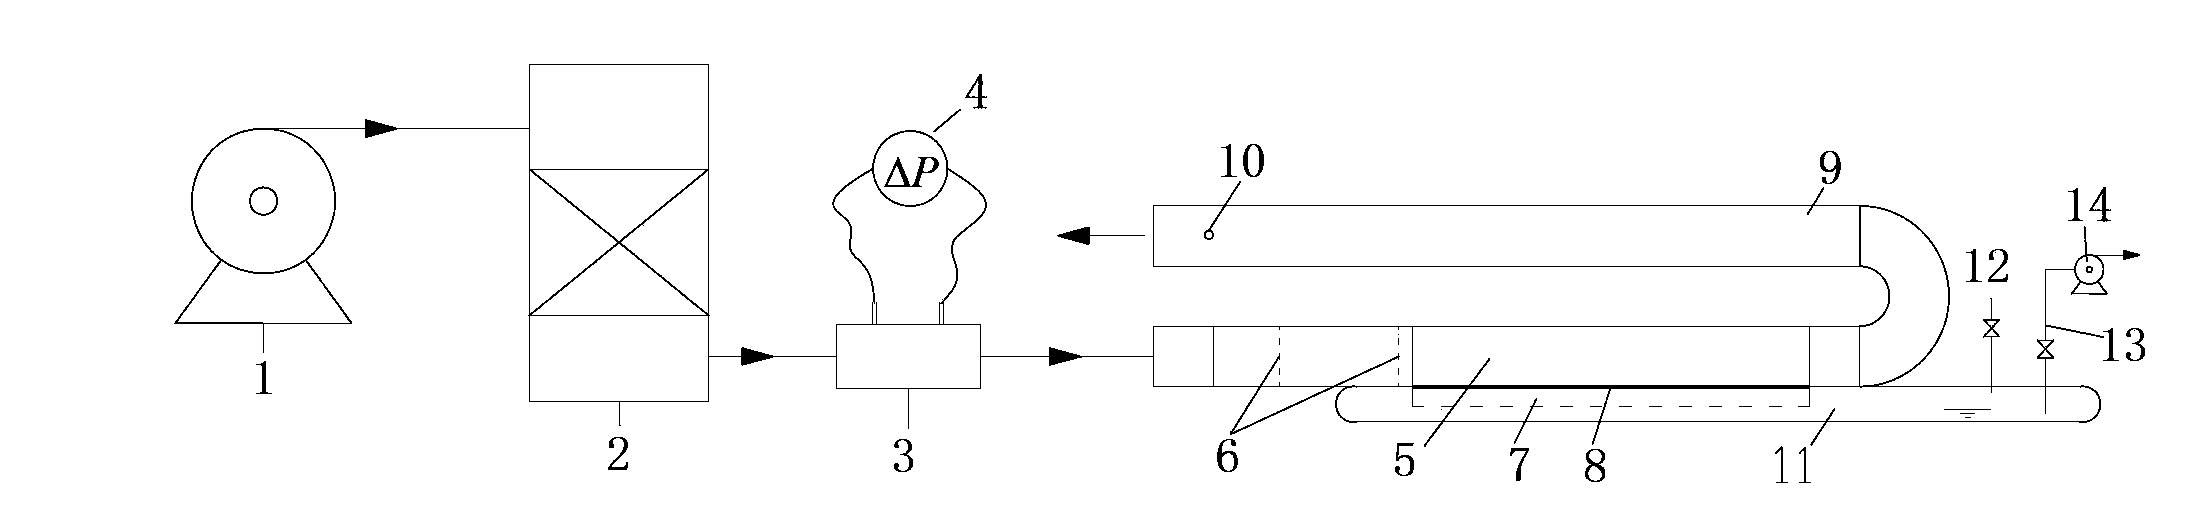 Sampling apparatus and method used for estimation of source intensity of non-point atmospheric pollution source